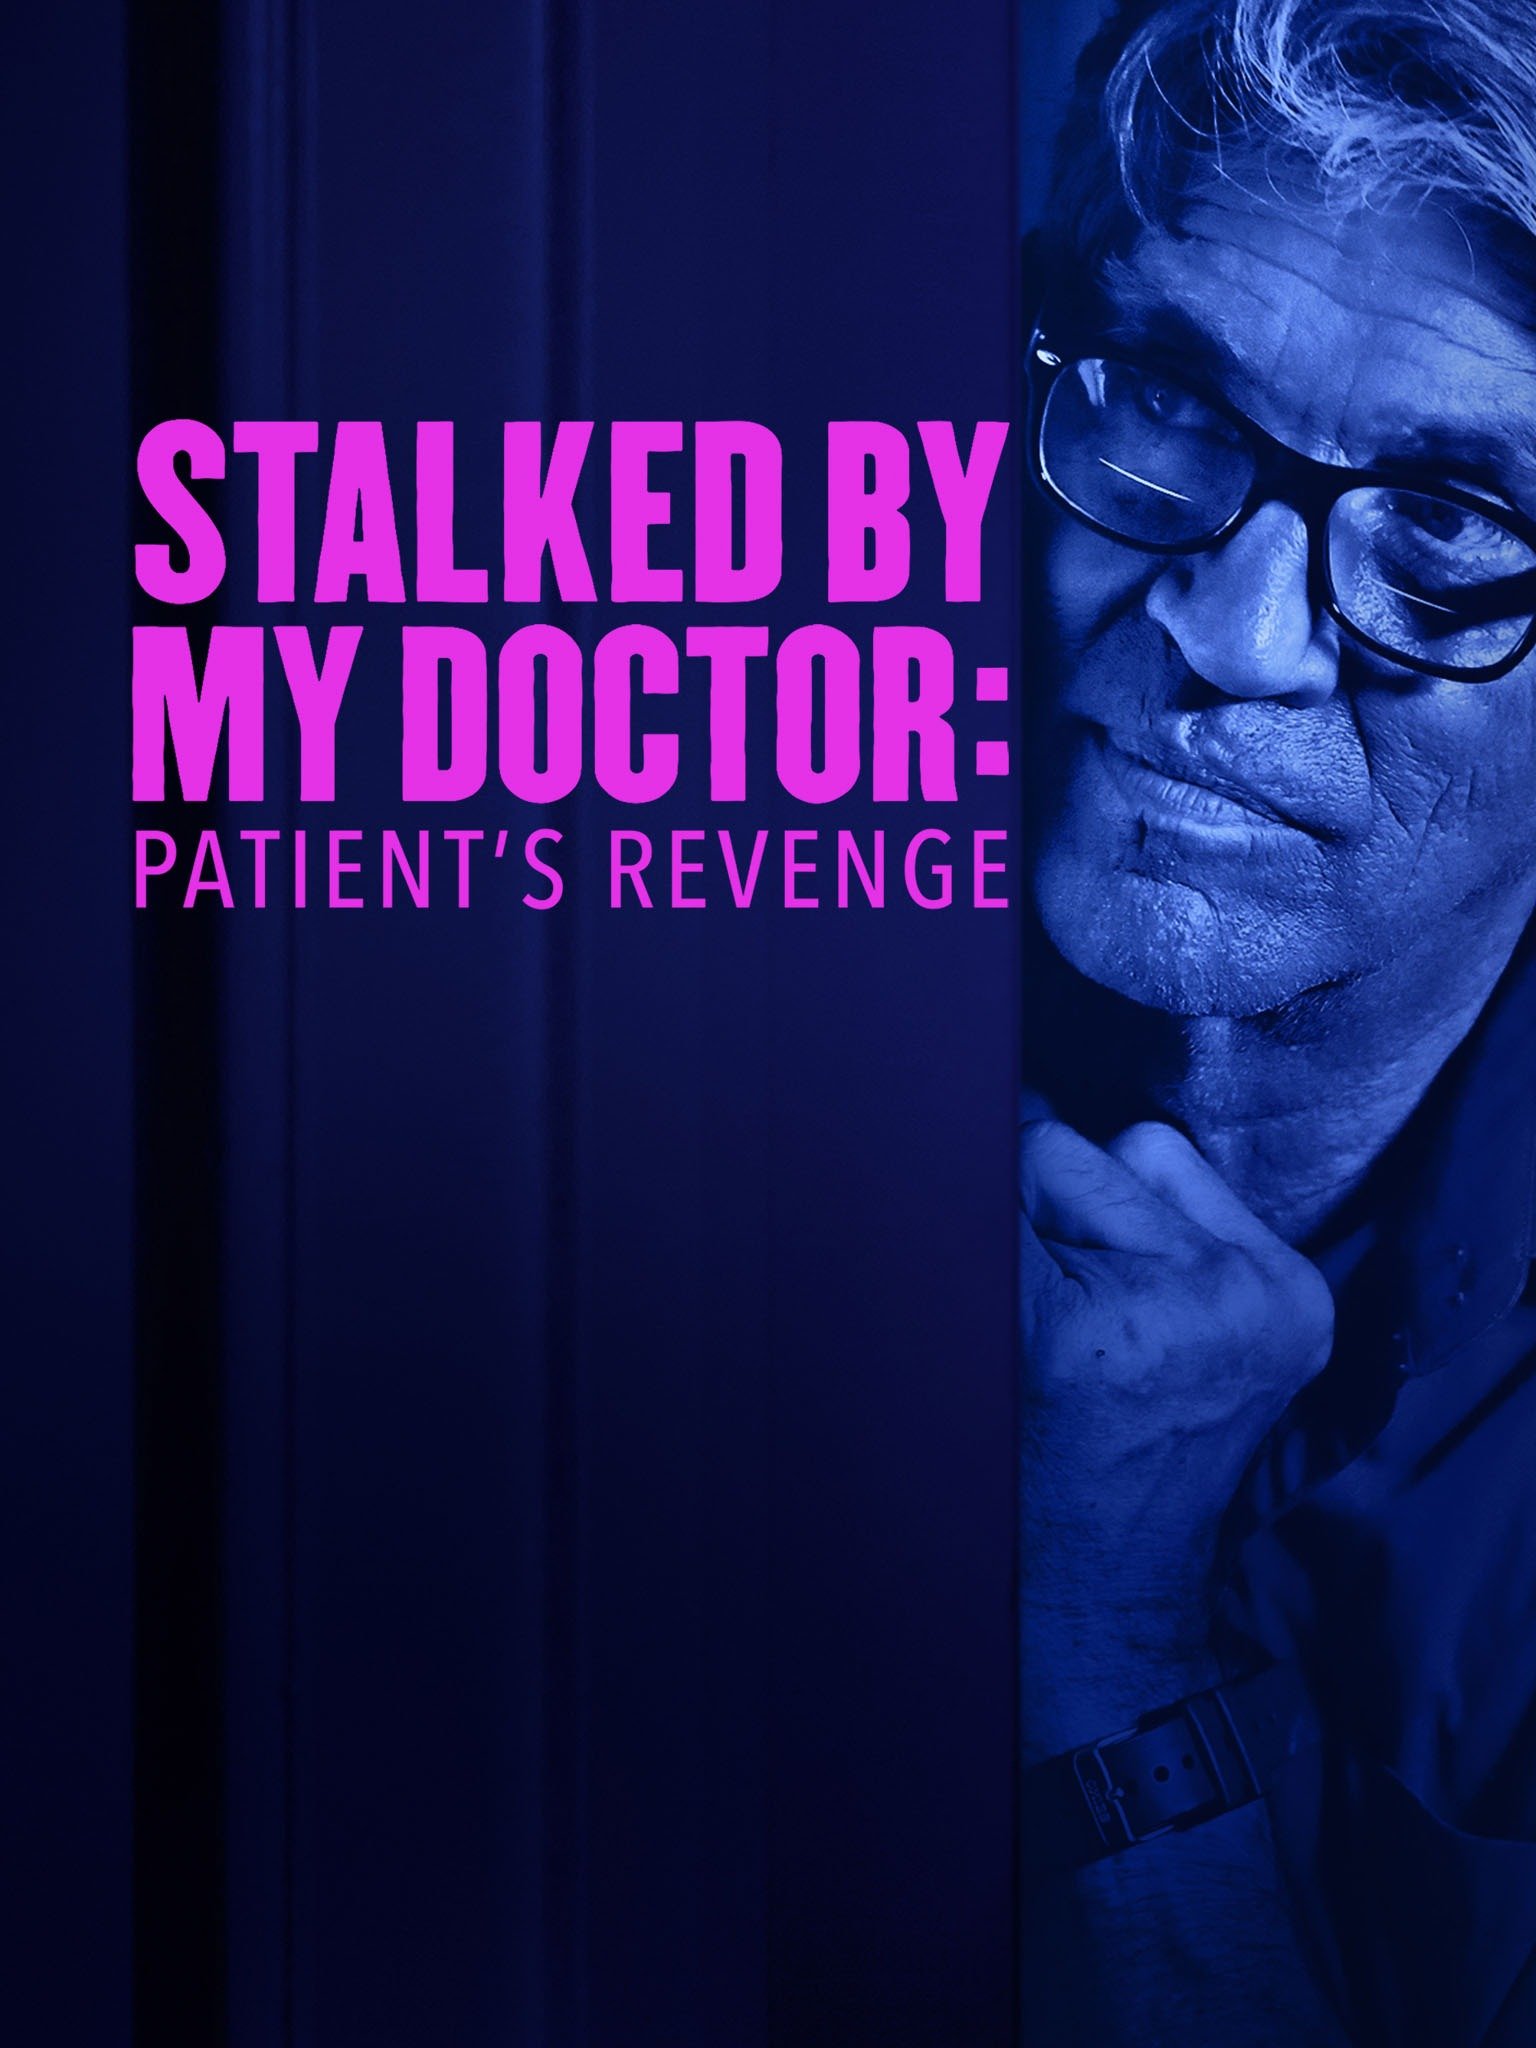 Stalked by My Doctor: Patient's Revenge (2018) Screenshot 4